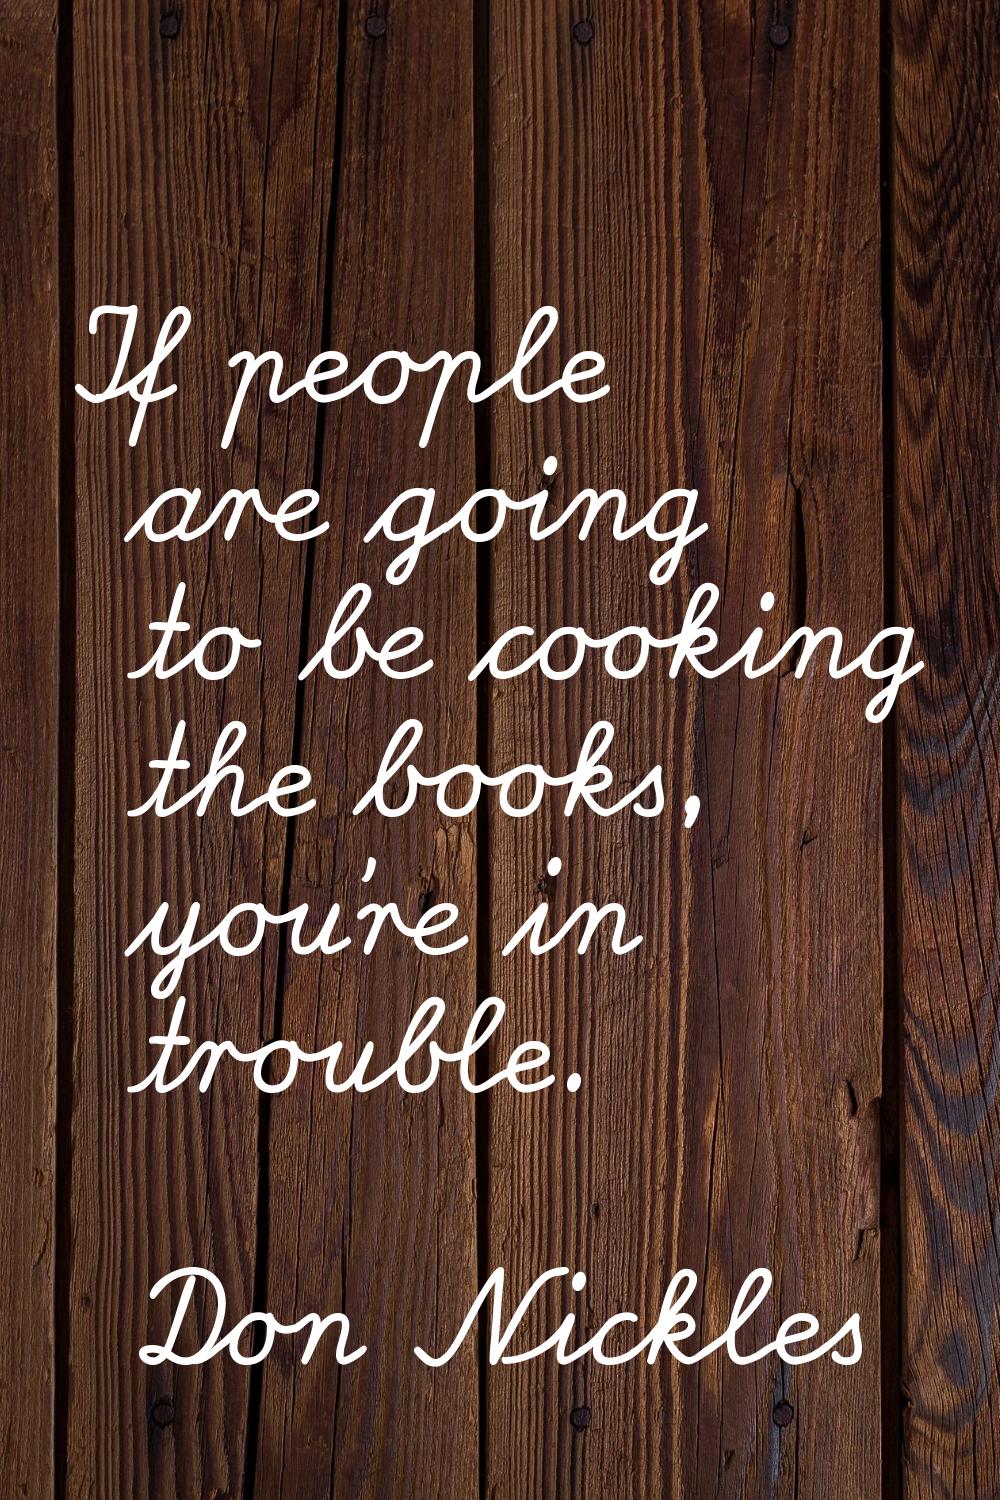 If people are going to be cooking the books, you're in trouble.